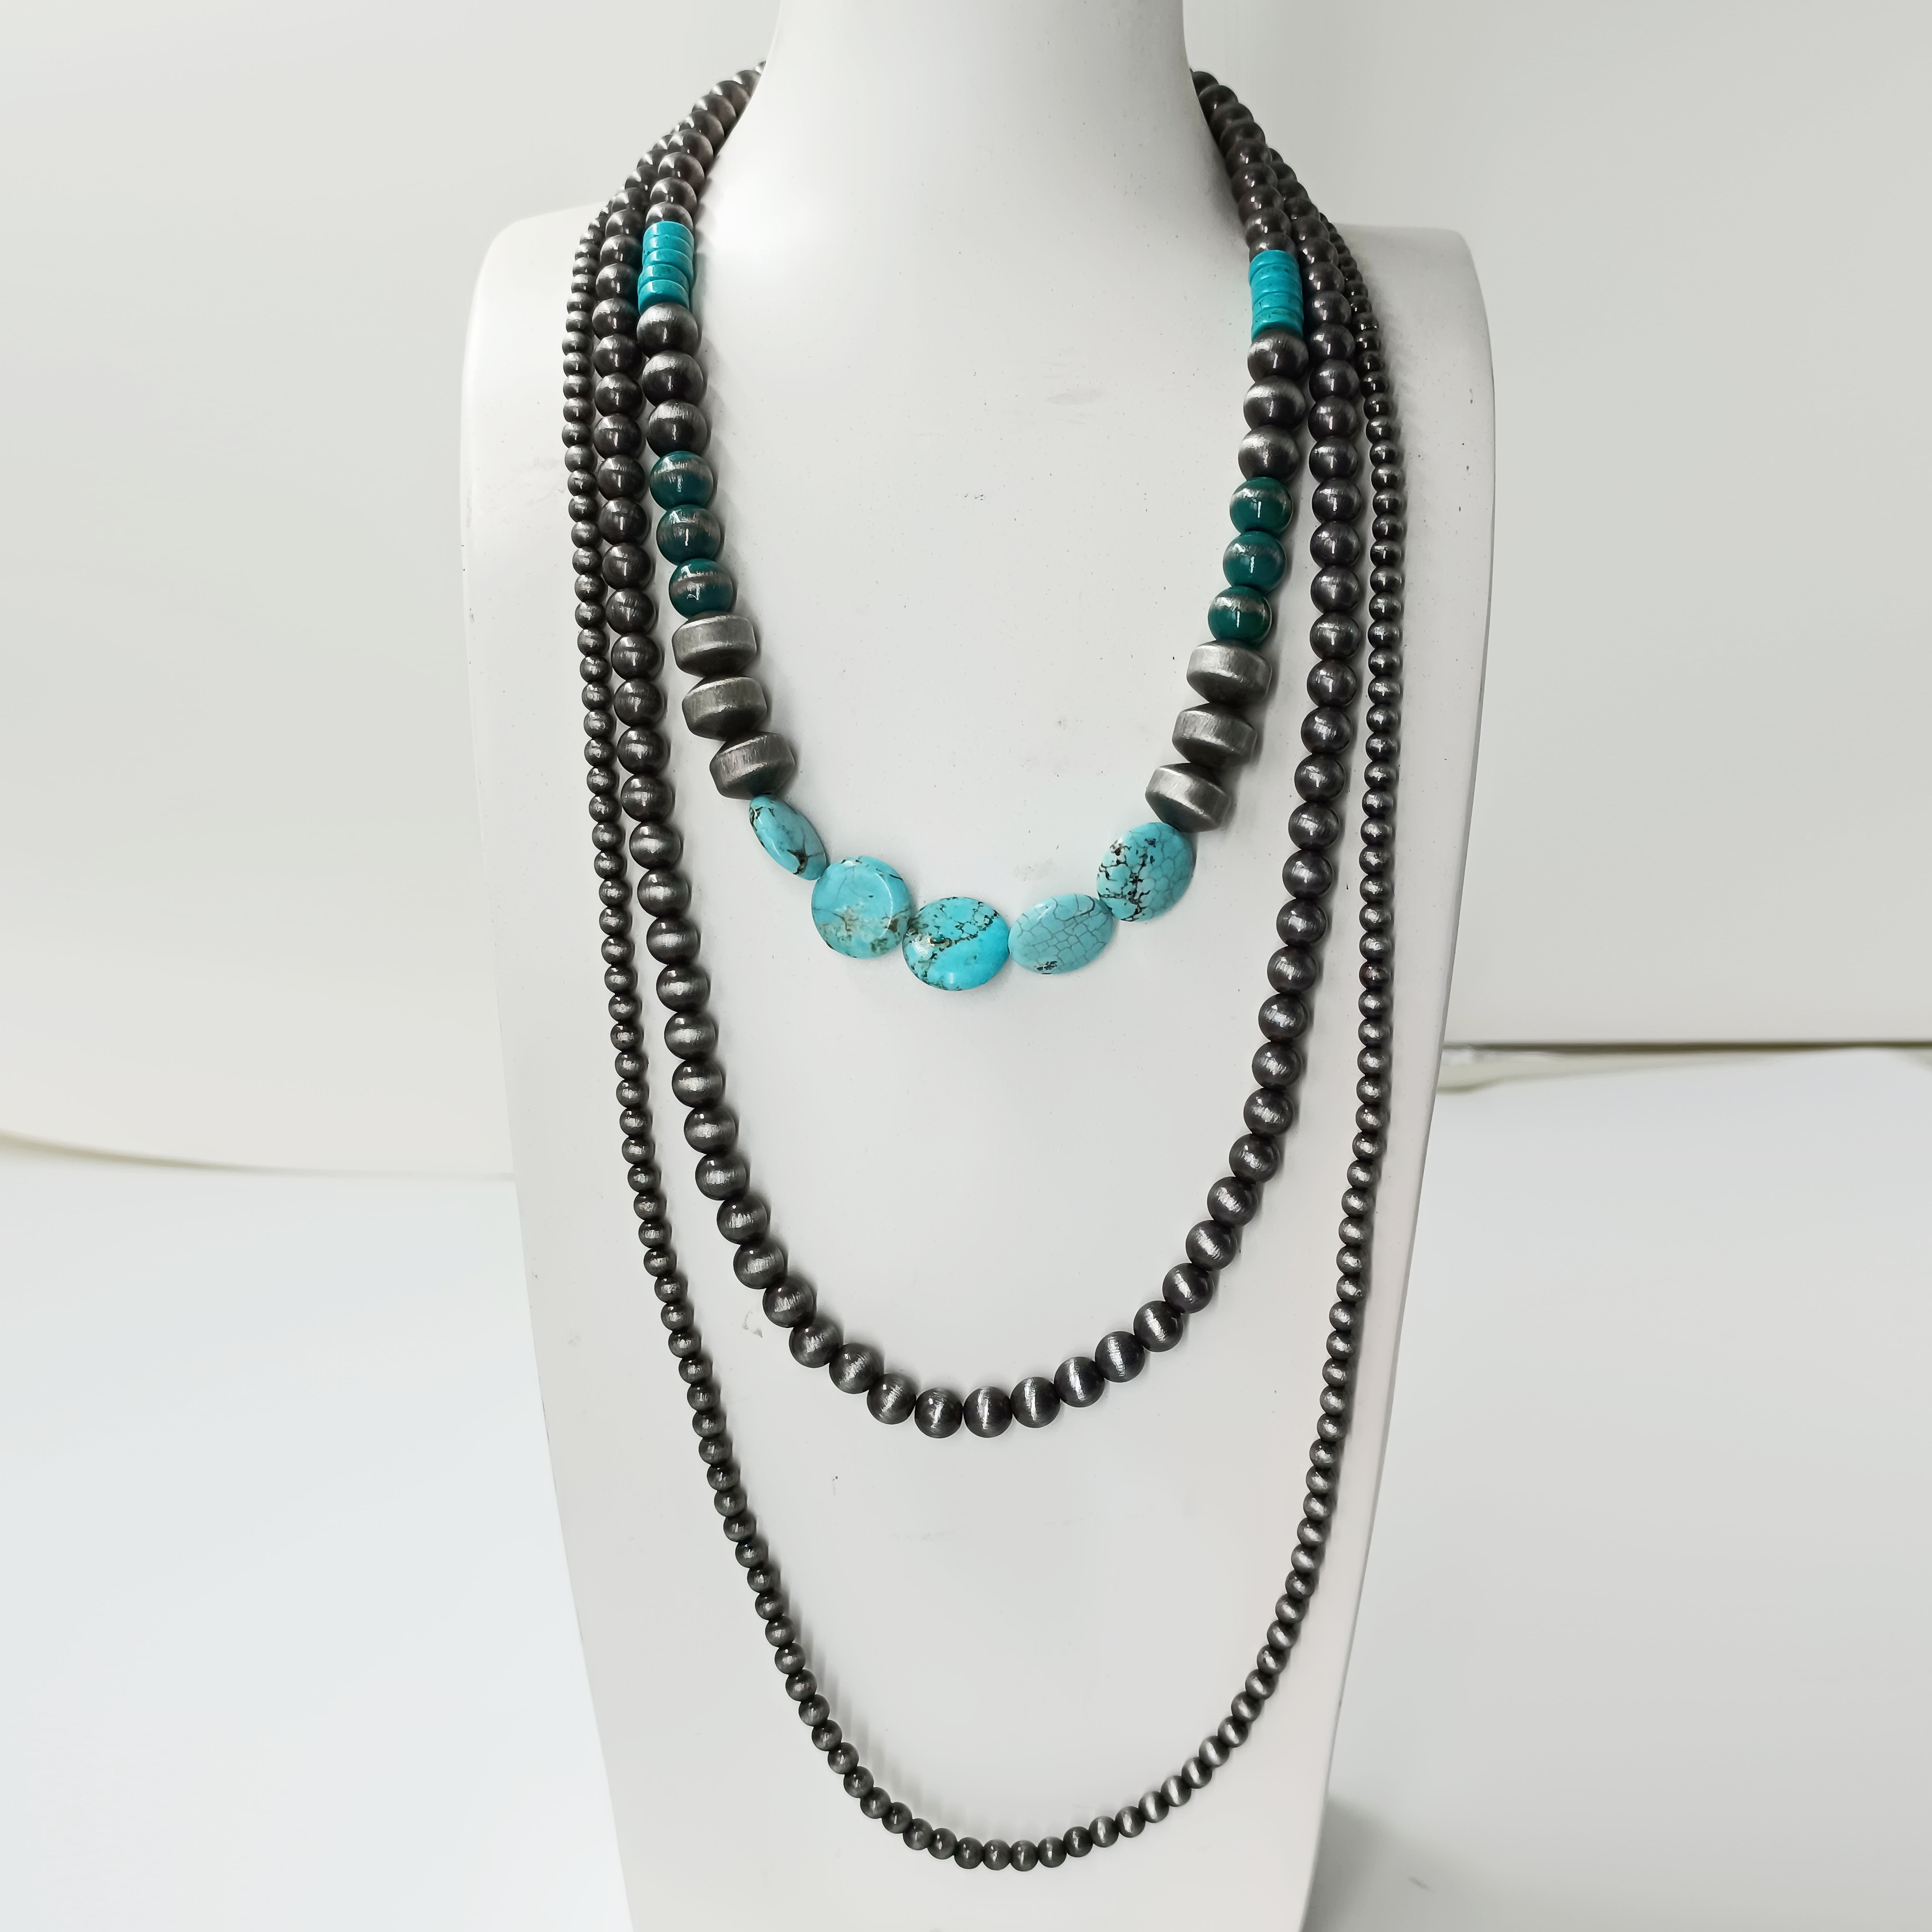 

Western Style Navajo Beaded Turquoise 3 Layer Necklace Boho Ornament Neck Jewelry Gift